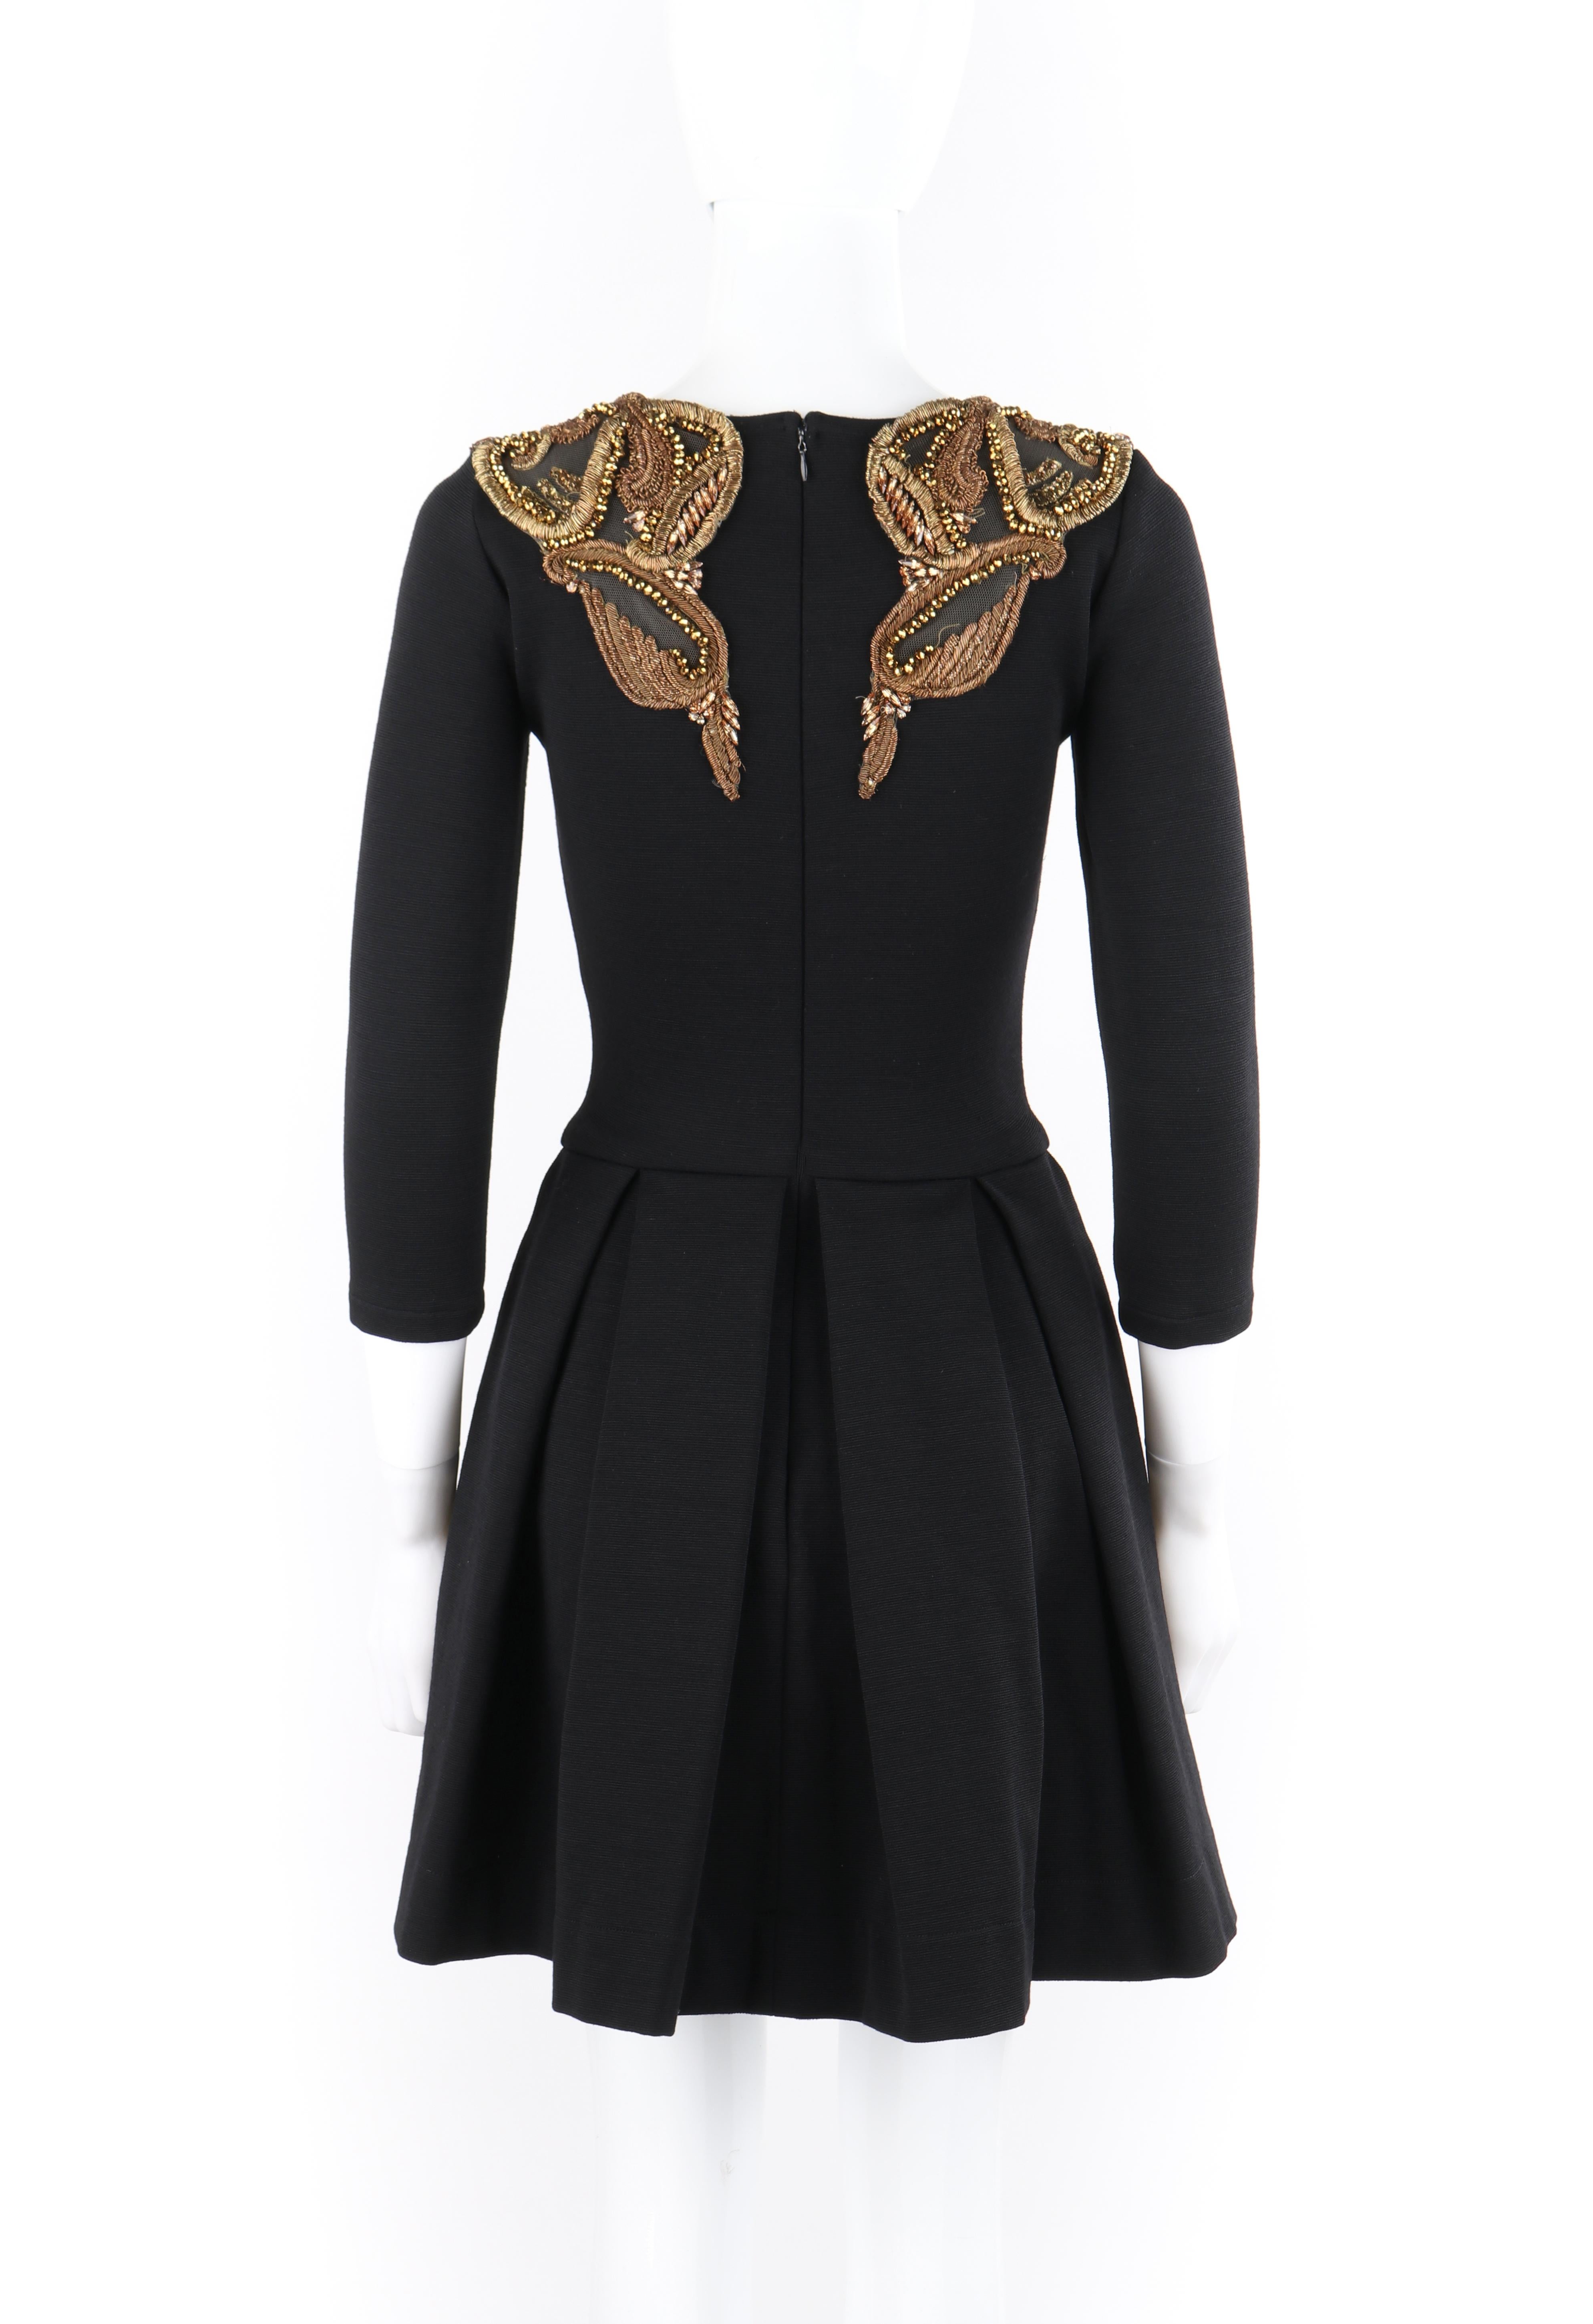 ALEXANDER McQUEEN A/W 2010 “Angels & Demons” Black Gold Beaded Fit n Flare Dress In Good Condition For Sale In Thiensville, WI